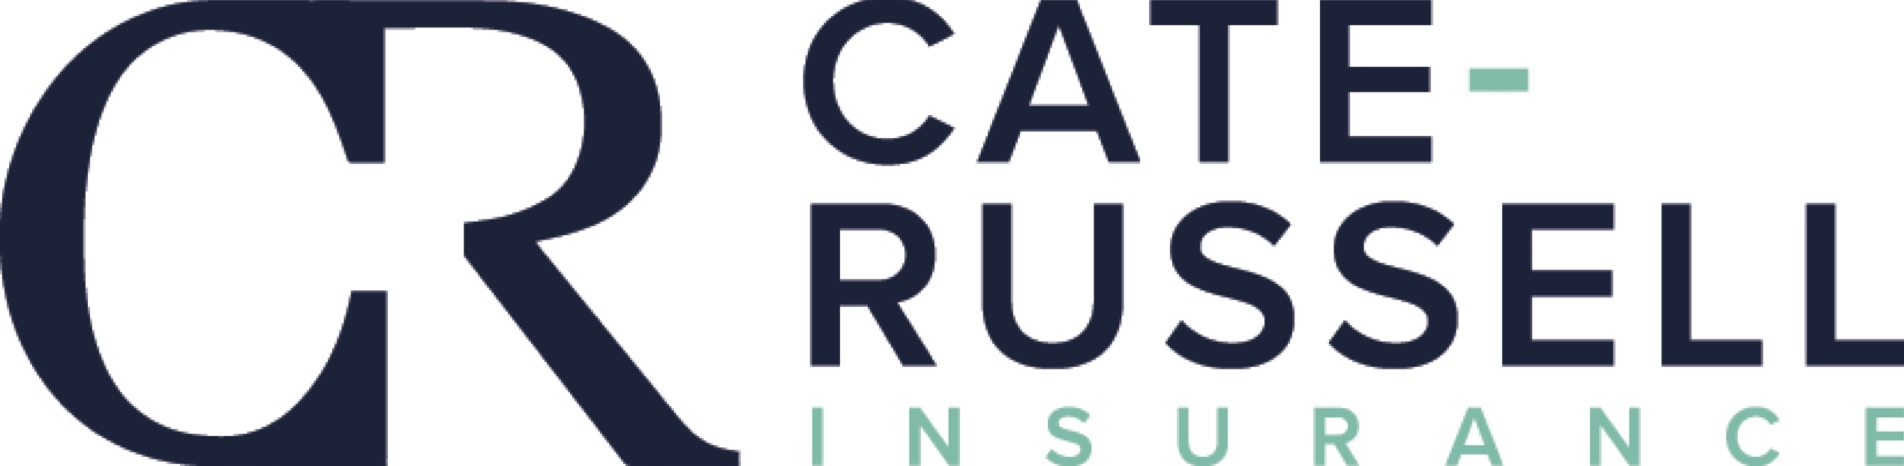 Cate-Russell Insurance